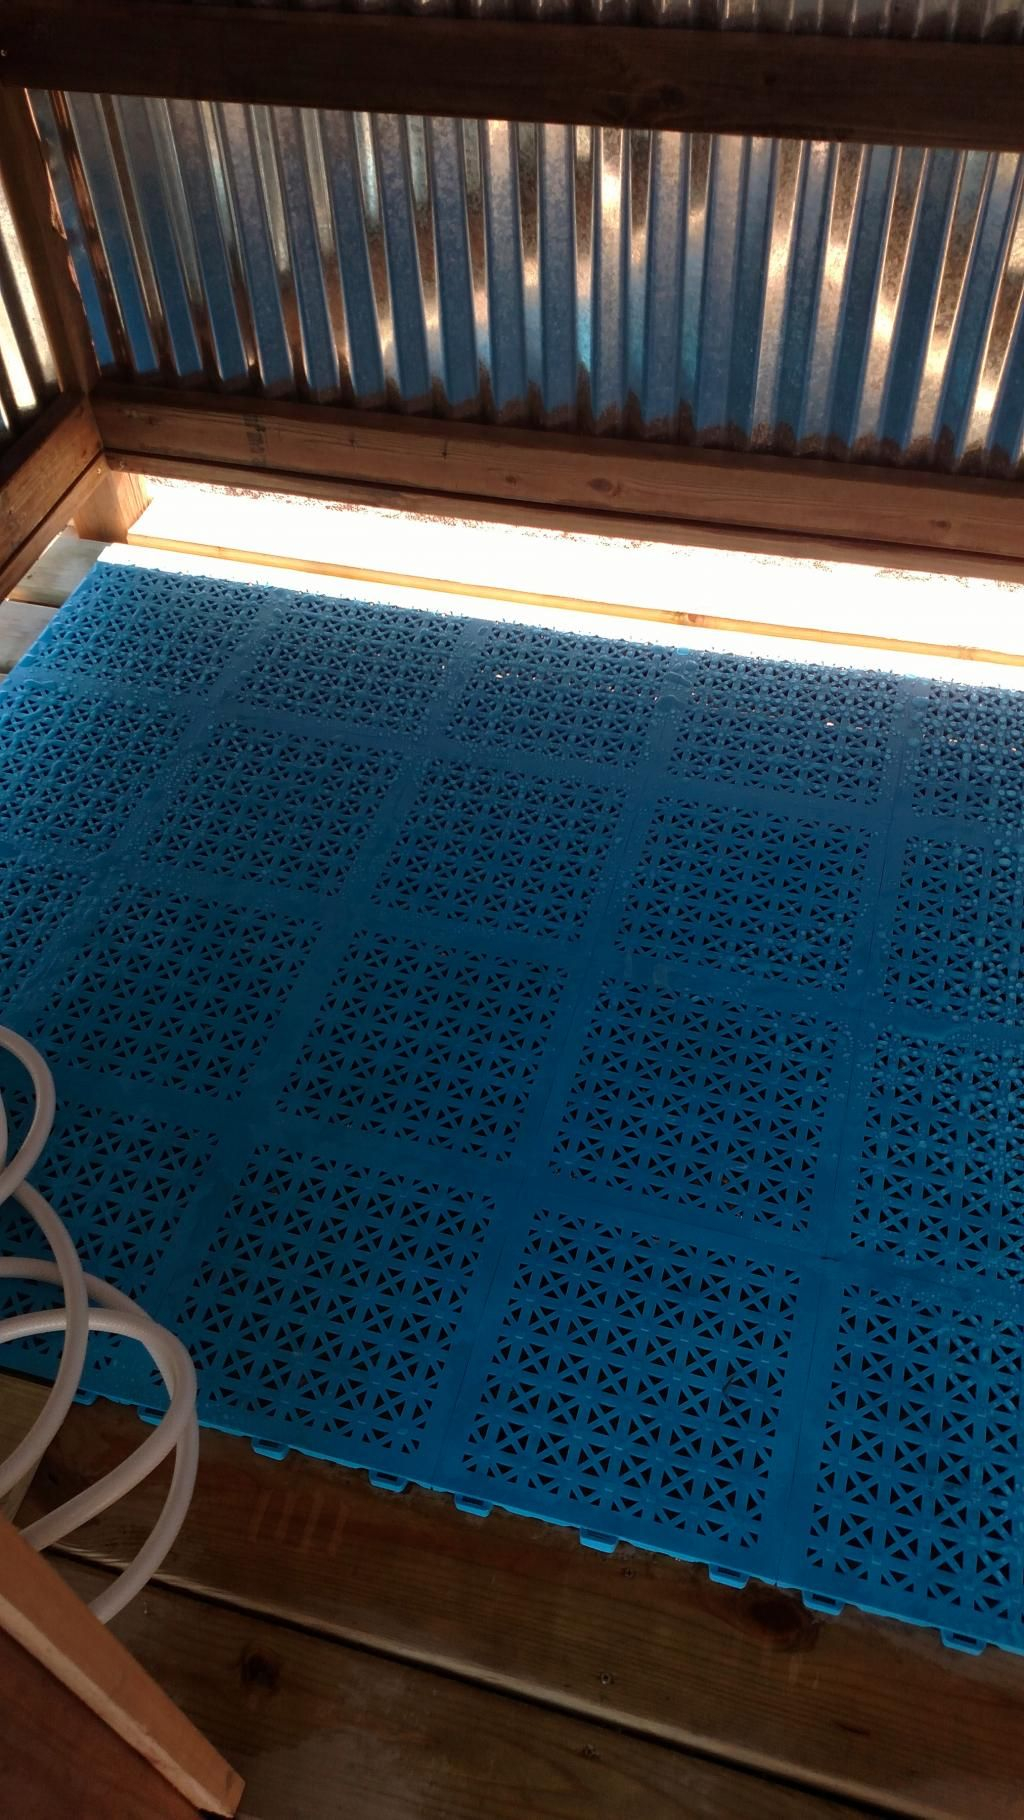 Staylock Tile Perforated Colors In 2019 Pool Deck Tiles And Mats in dimensions 1024 X 1820